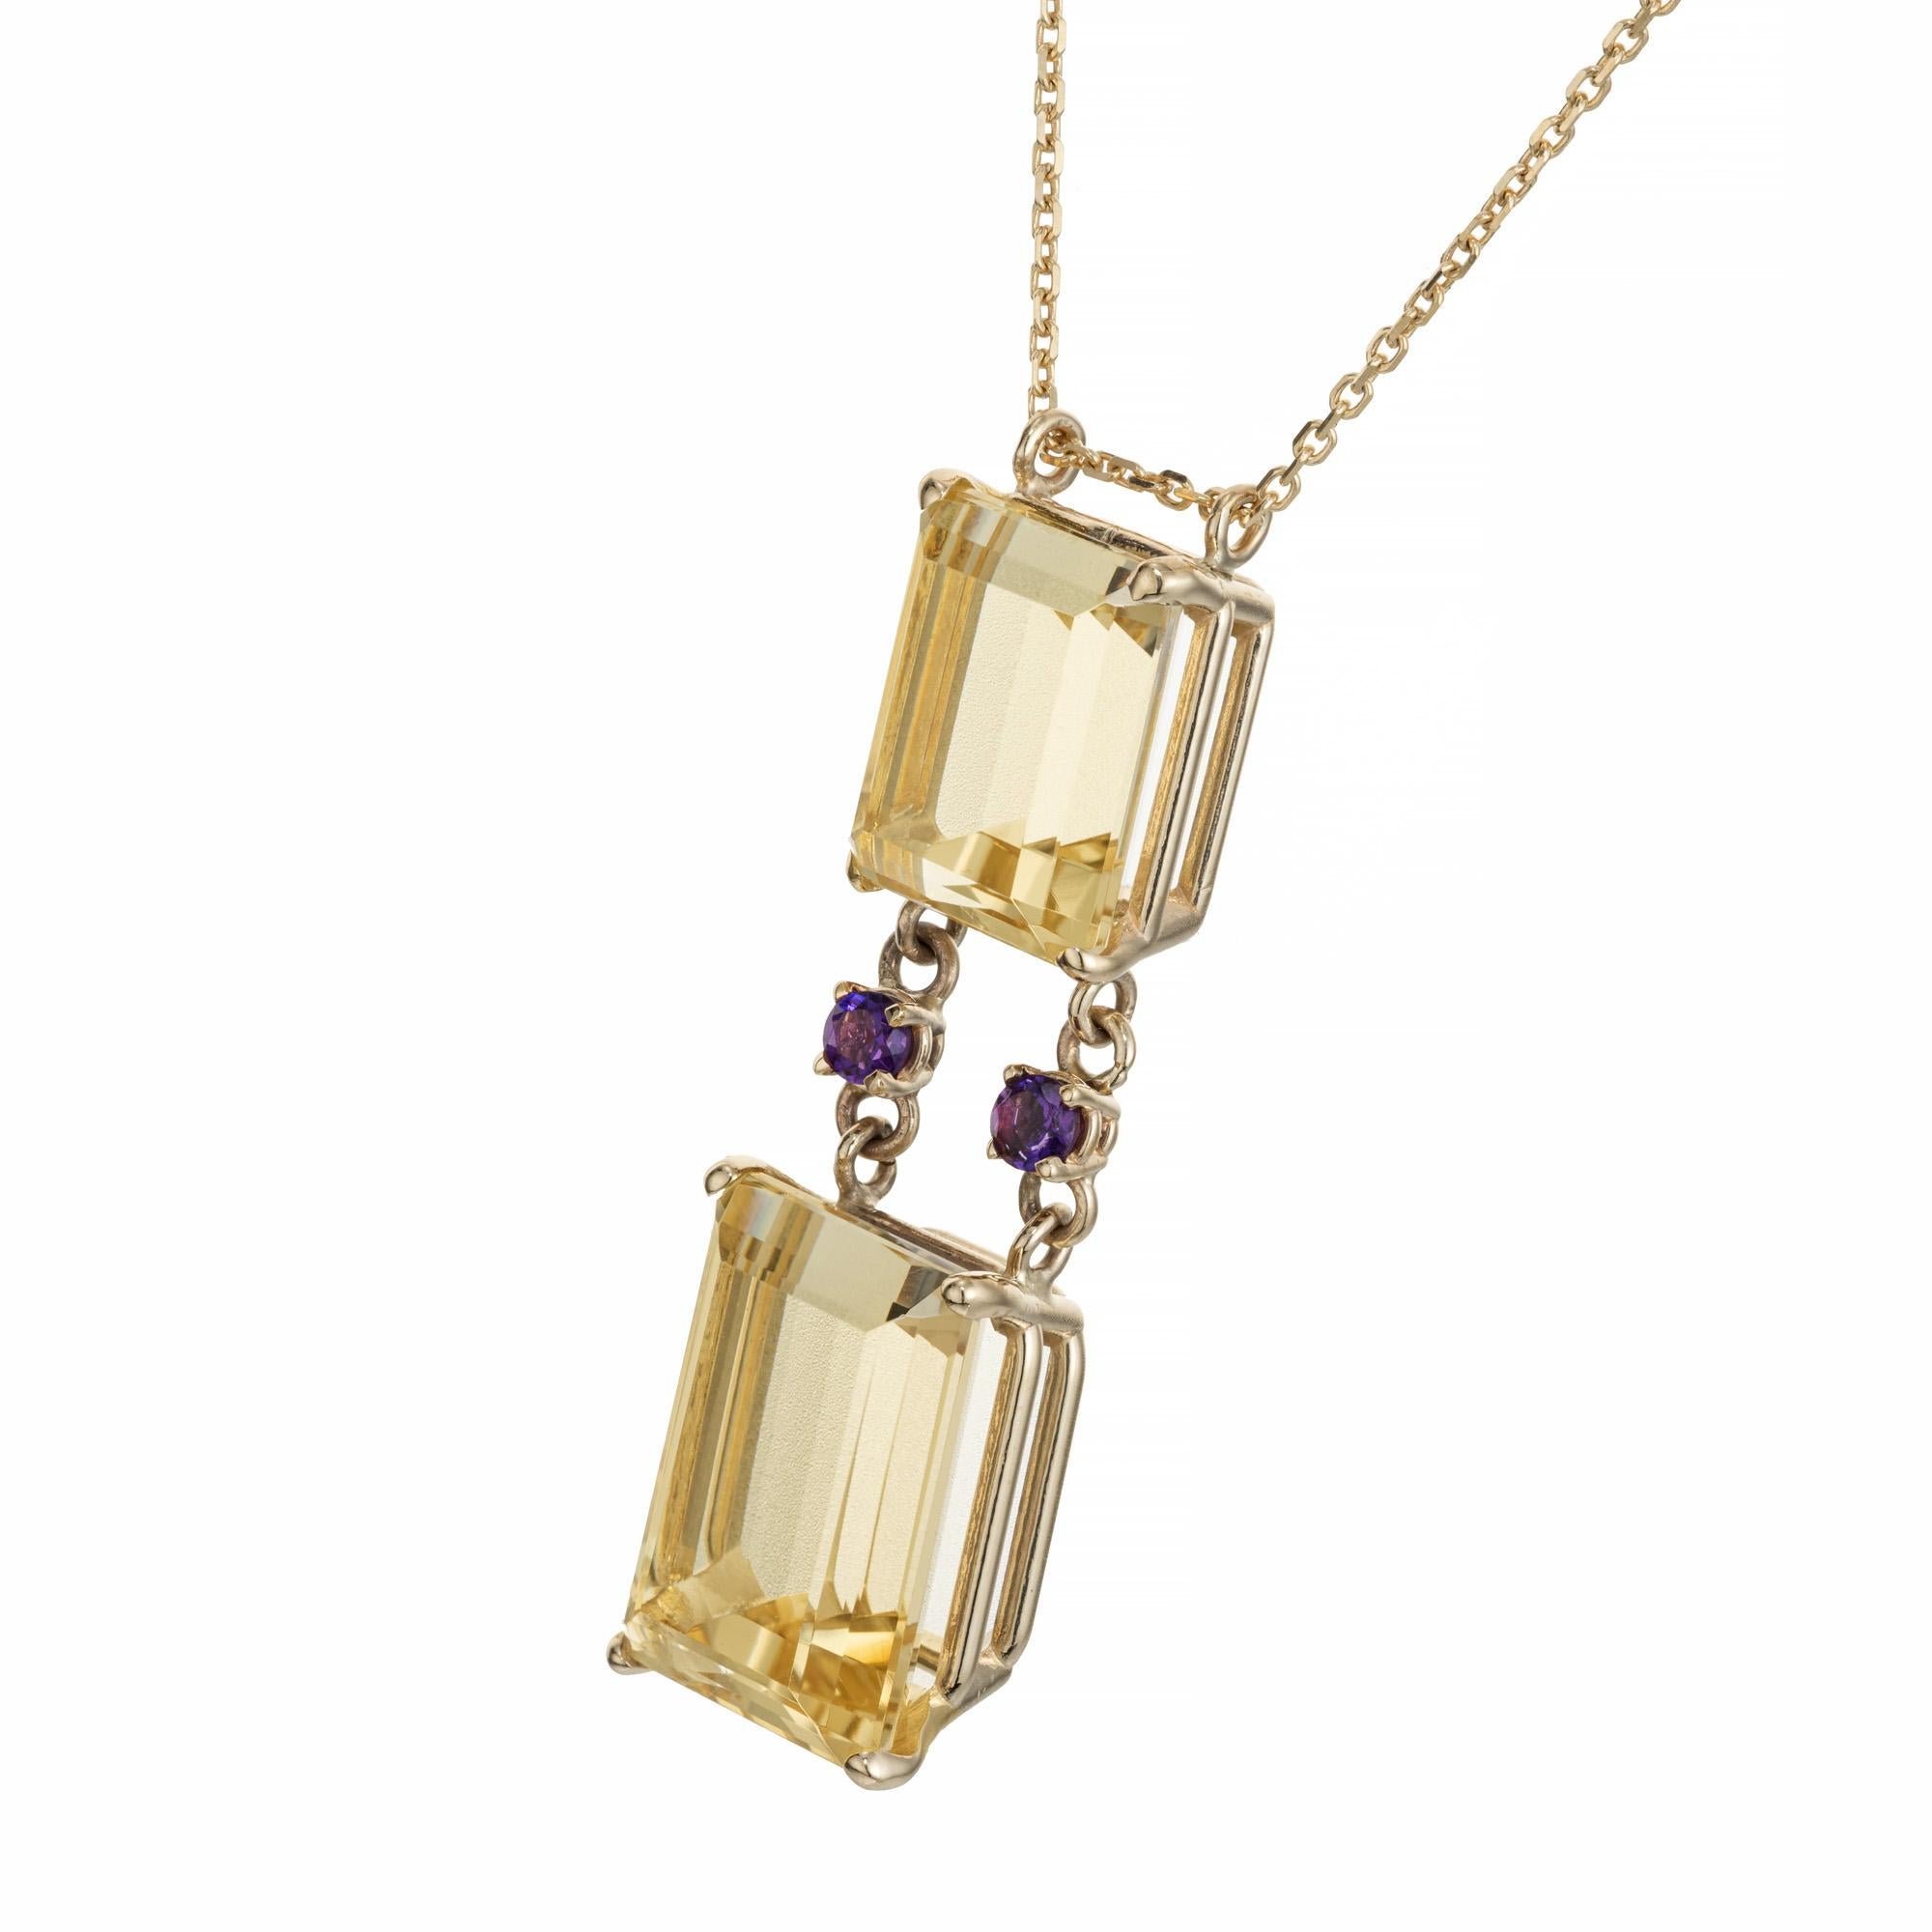 Beryl Heliodor and amethyst Art Deco style pendant necklace. Made from two bright yellow genuine golden Beryl Heliodor emerald cut shape. Hinged and separated by two round 2.7mm bright purple Amethyst.  The stones are set into a simple 14k yellow